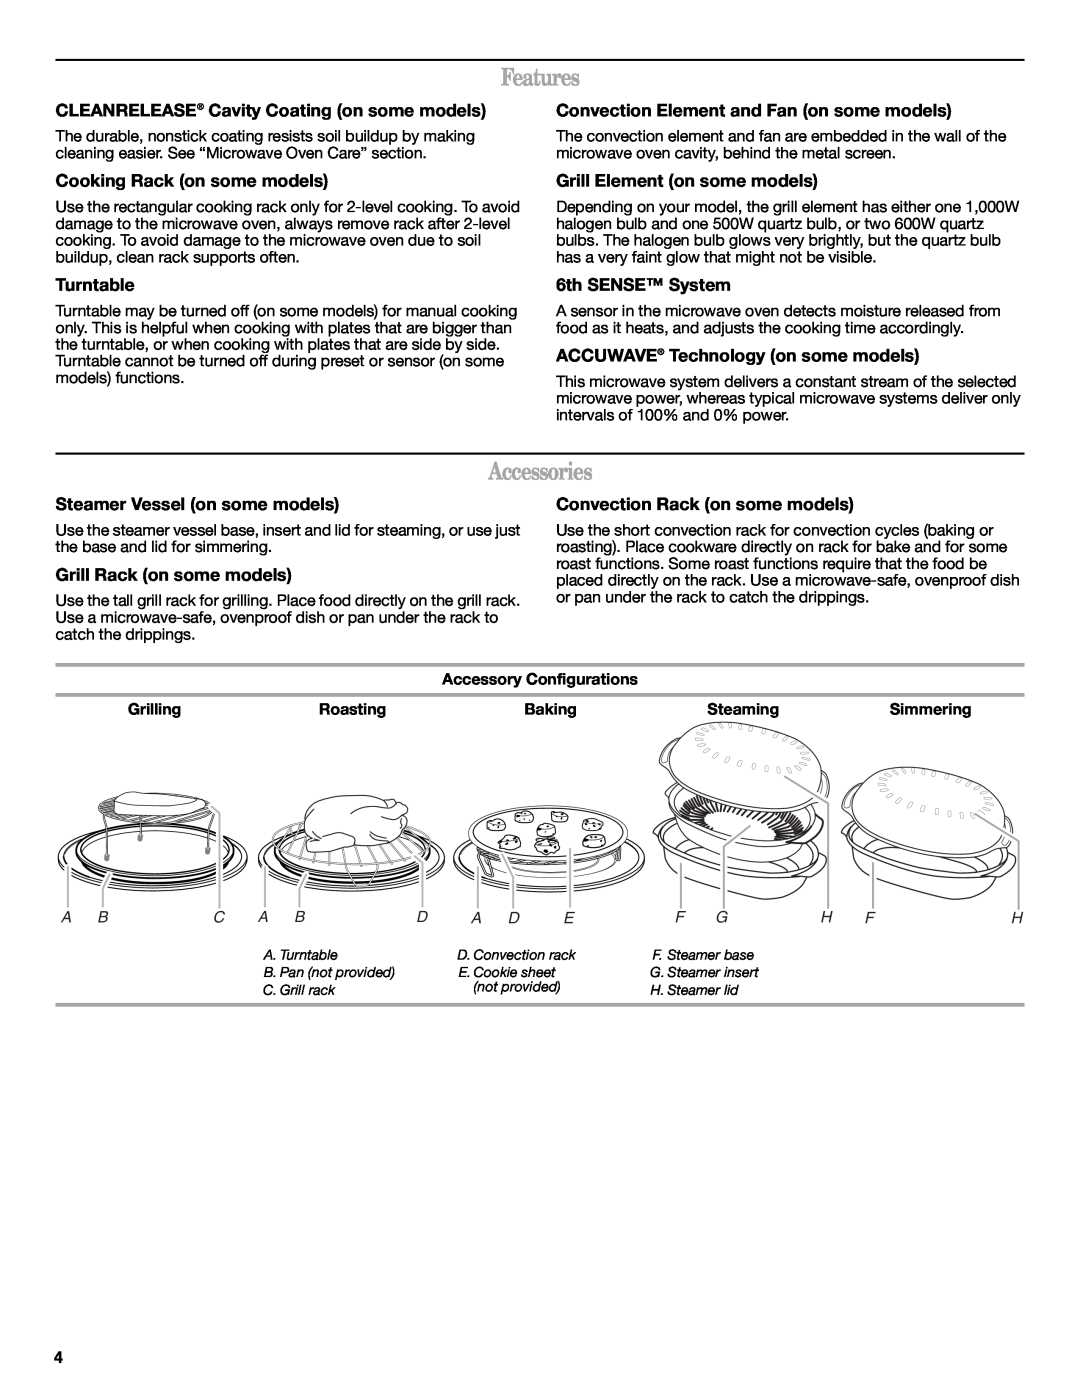 Whirlpool W10249654A Features, Accessories, CLEANRELEASE Cavity Coating on some models, Cooking Rack on some models 